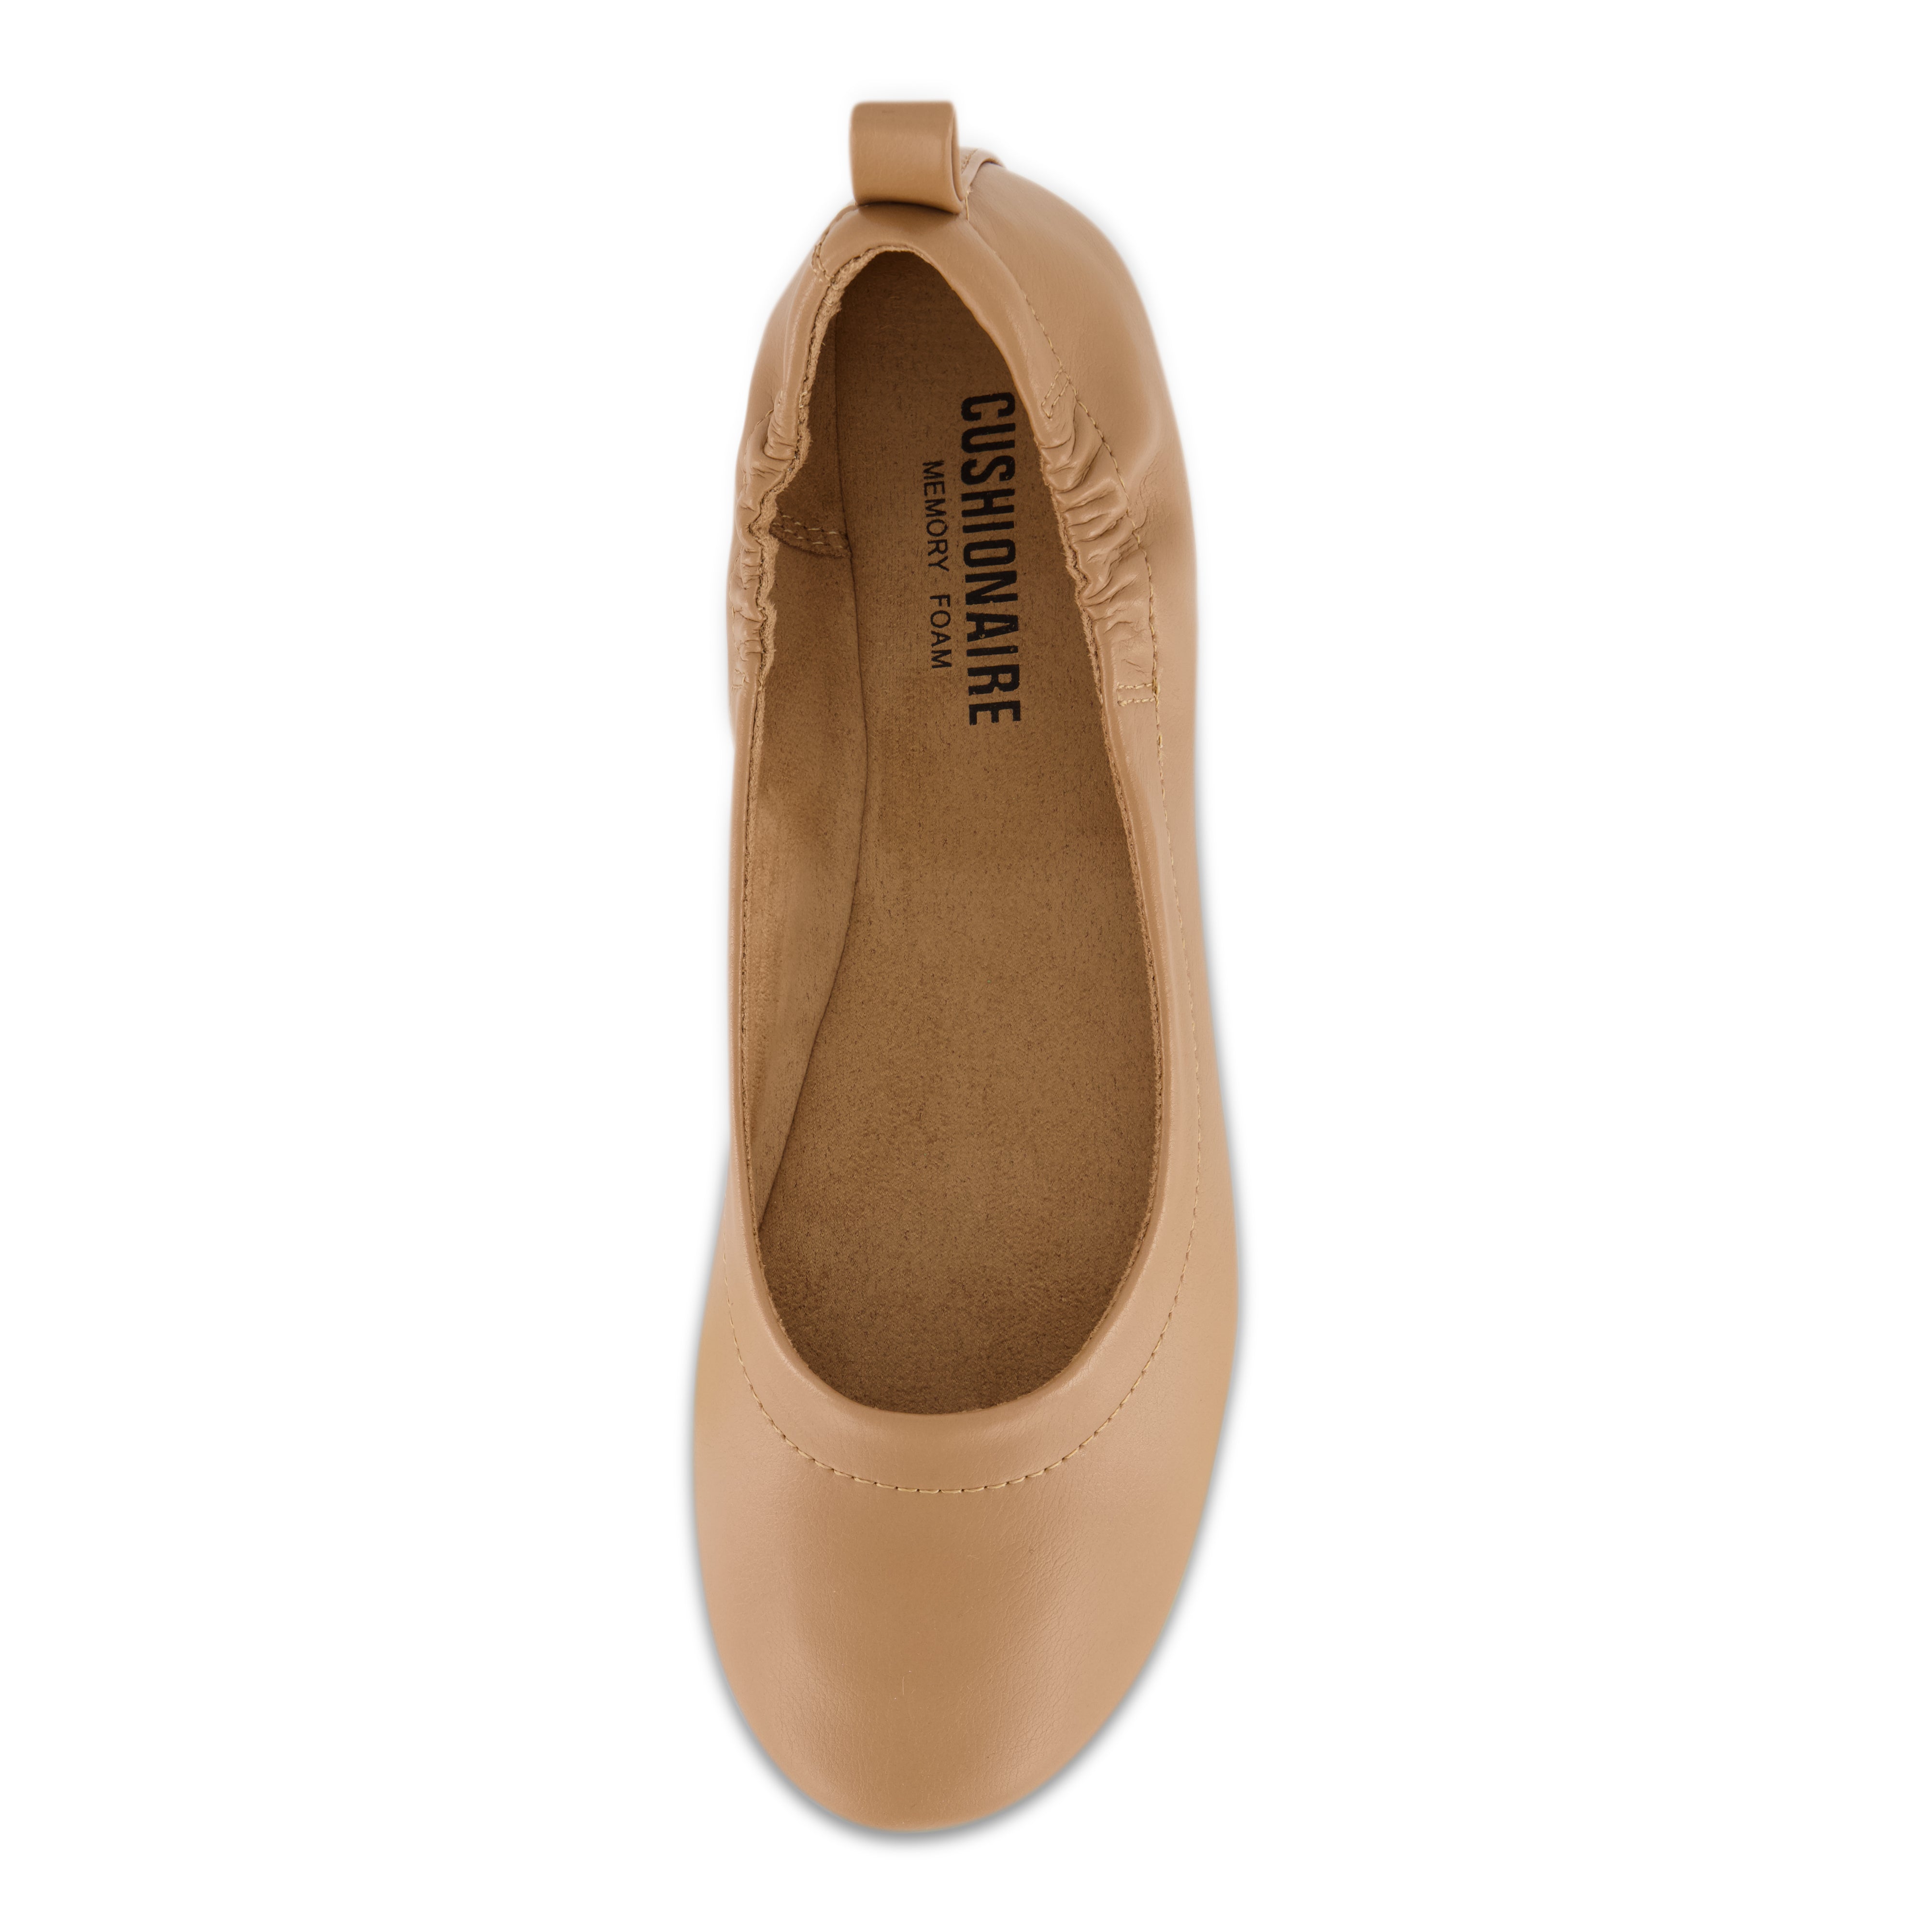 Misty Casual Ballet Flat Nudes